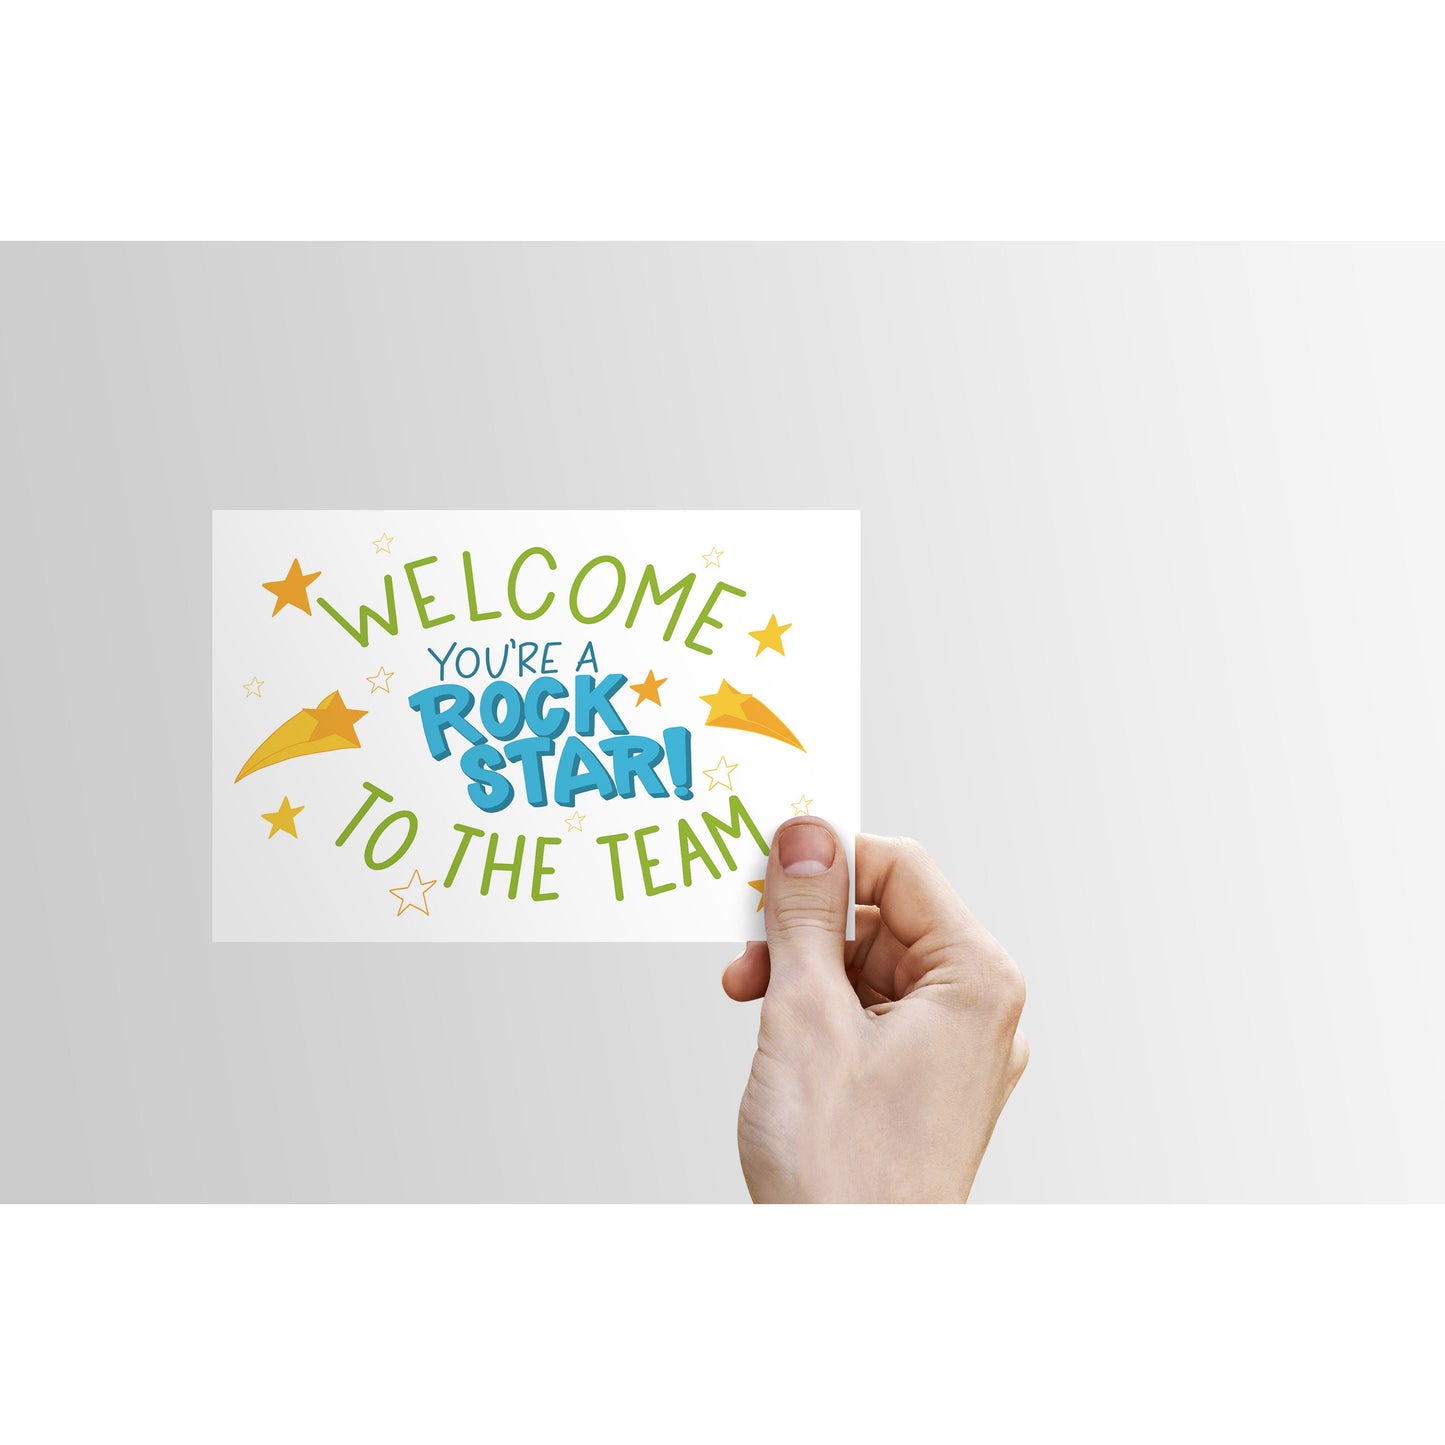 Welcome to the Team. You're a Rock Star! - Greeting Card | onboarding, new employee